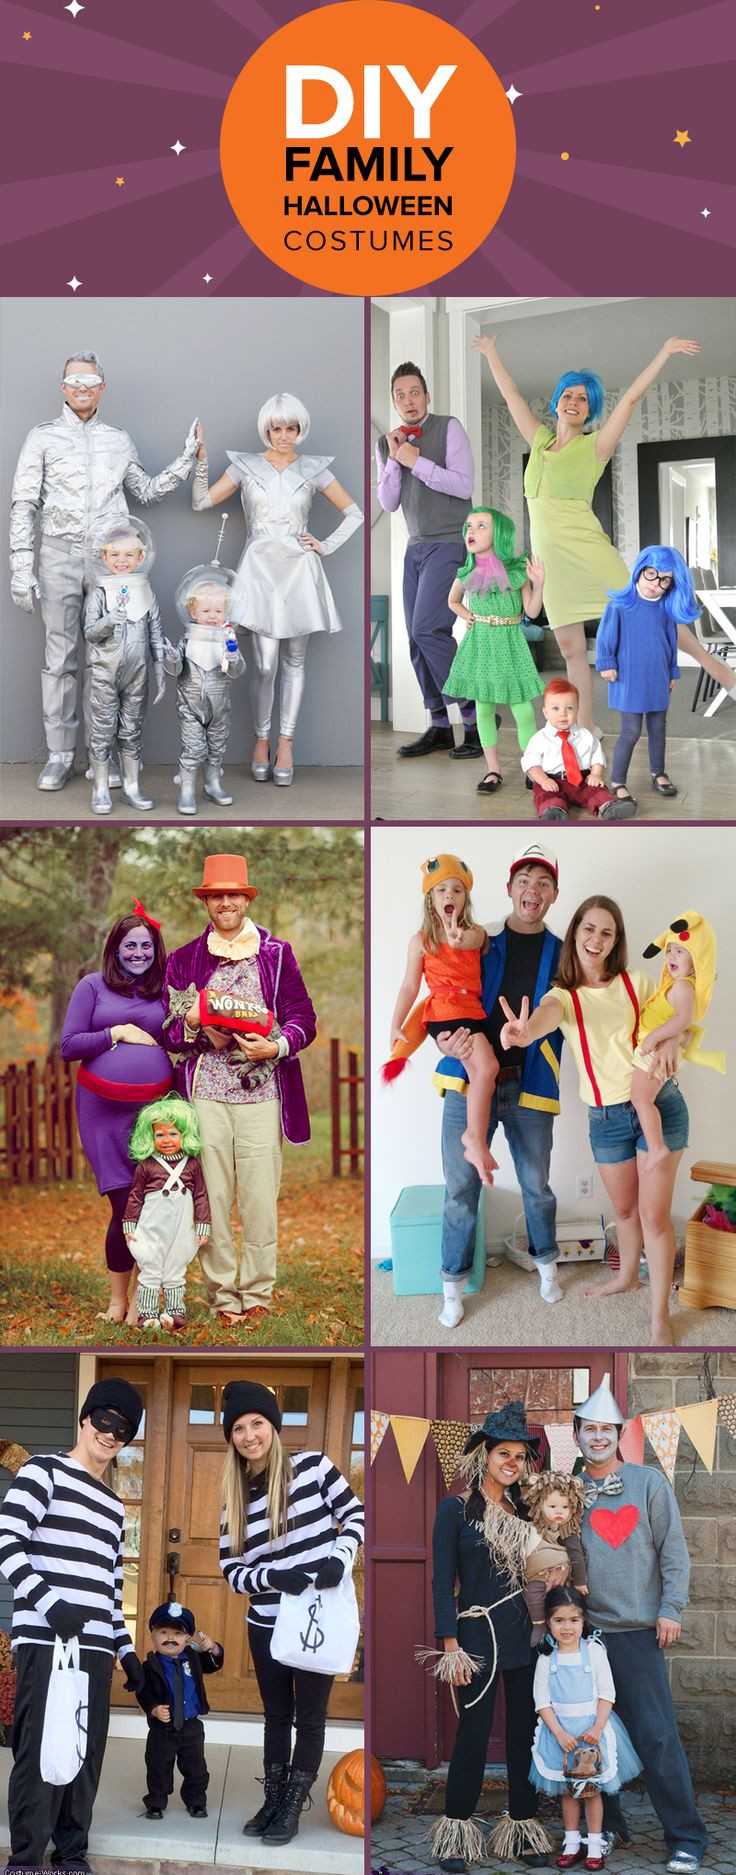 DIY Family Halloween Costumes
 25 best ideas about Four seasons costume on Pinterest